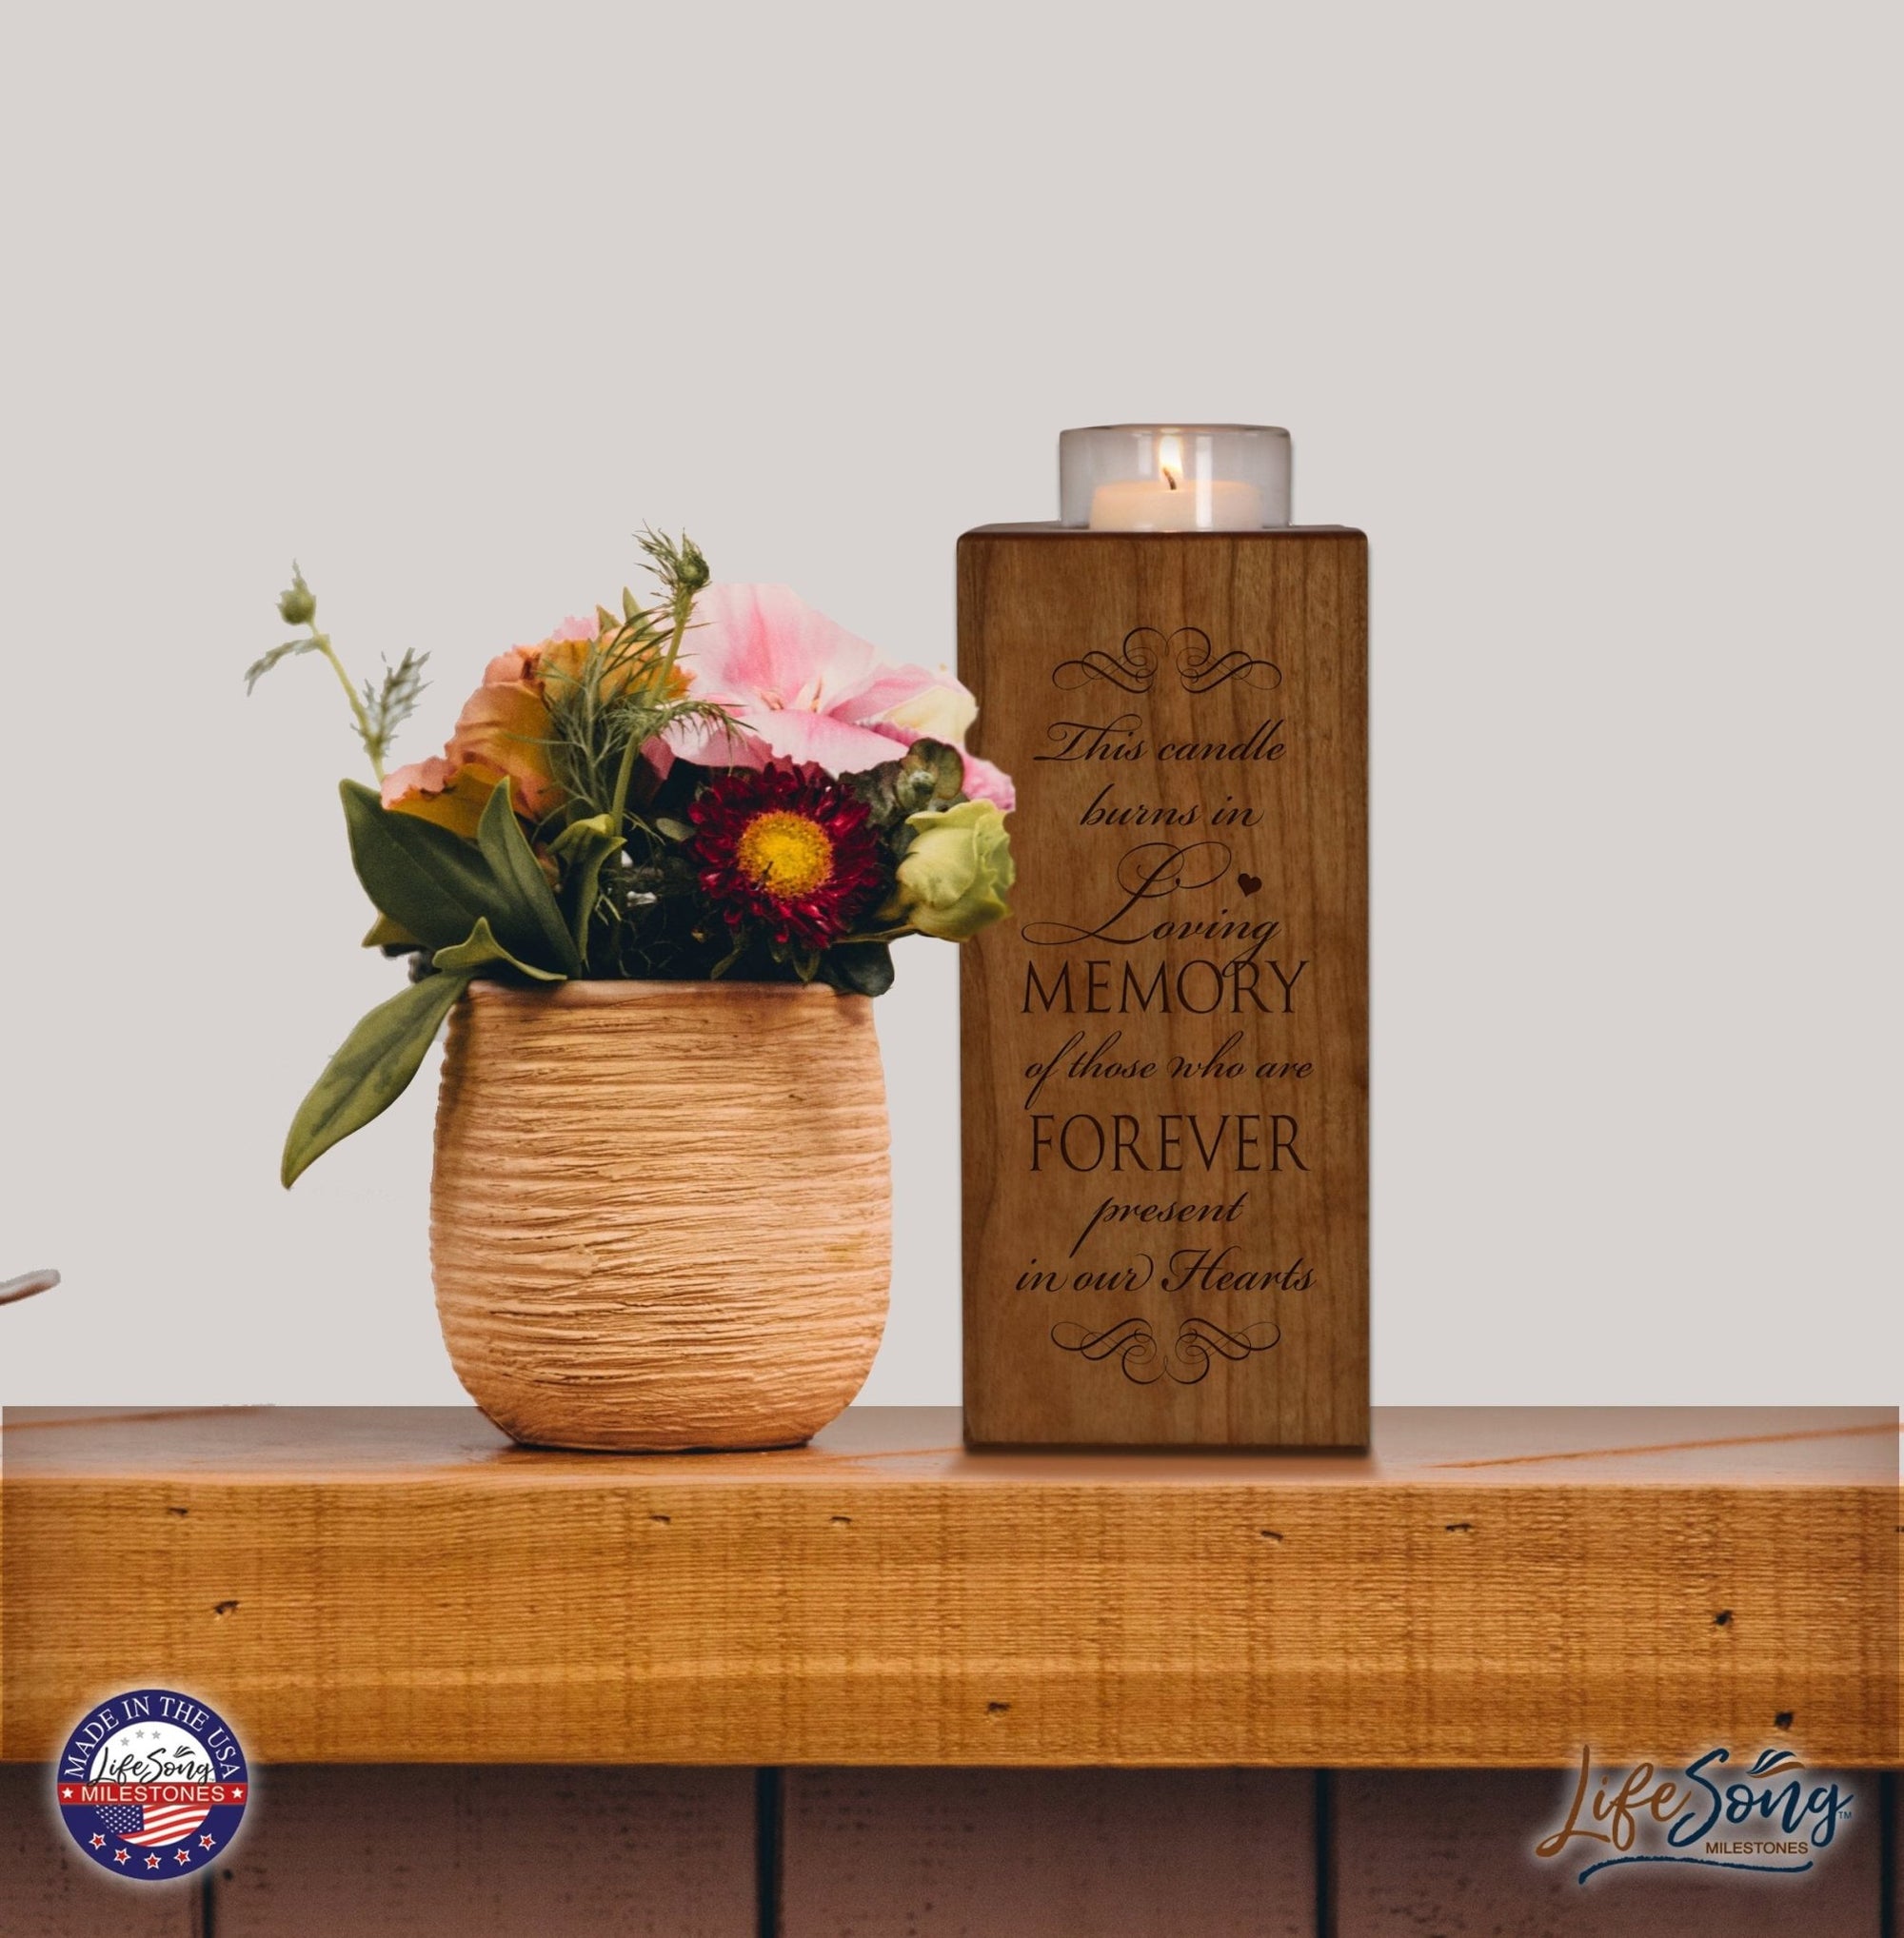 Cherry Wood Single Votive Candle Holder This Candle - LifeSong Milestones